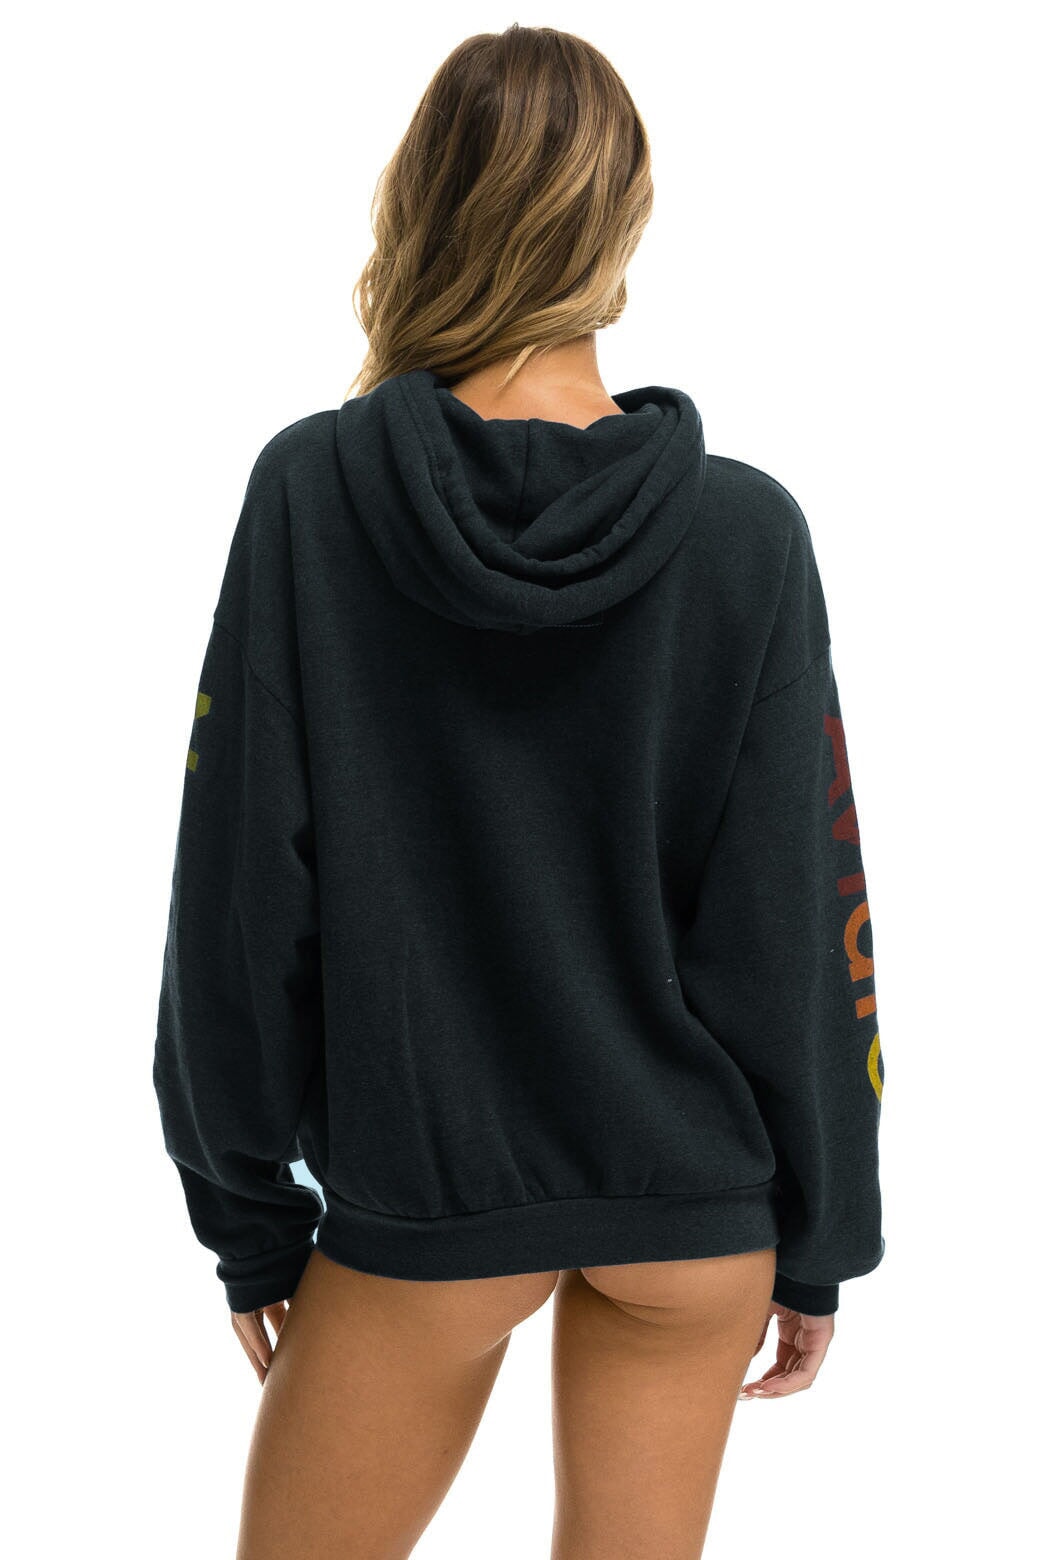 AVIATOR NATION LAS VEGAS RELAXED PULLOVER HOODIE - CHARCOAL Hoodie Aviator Nation 